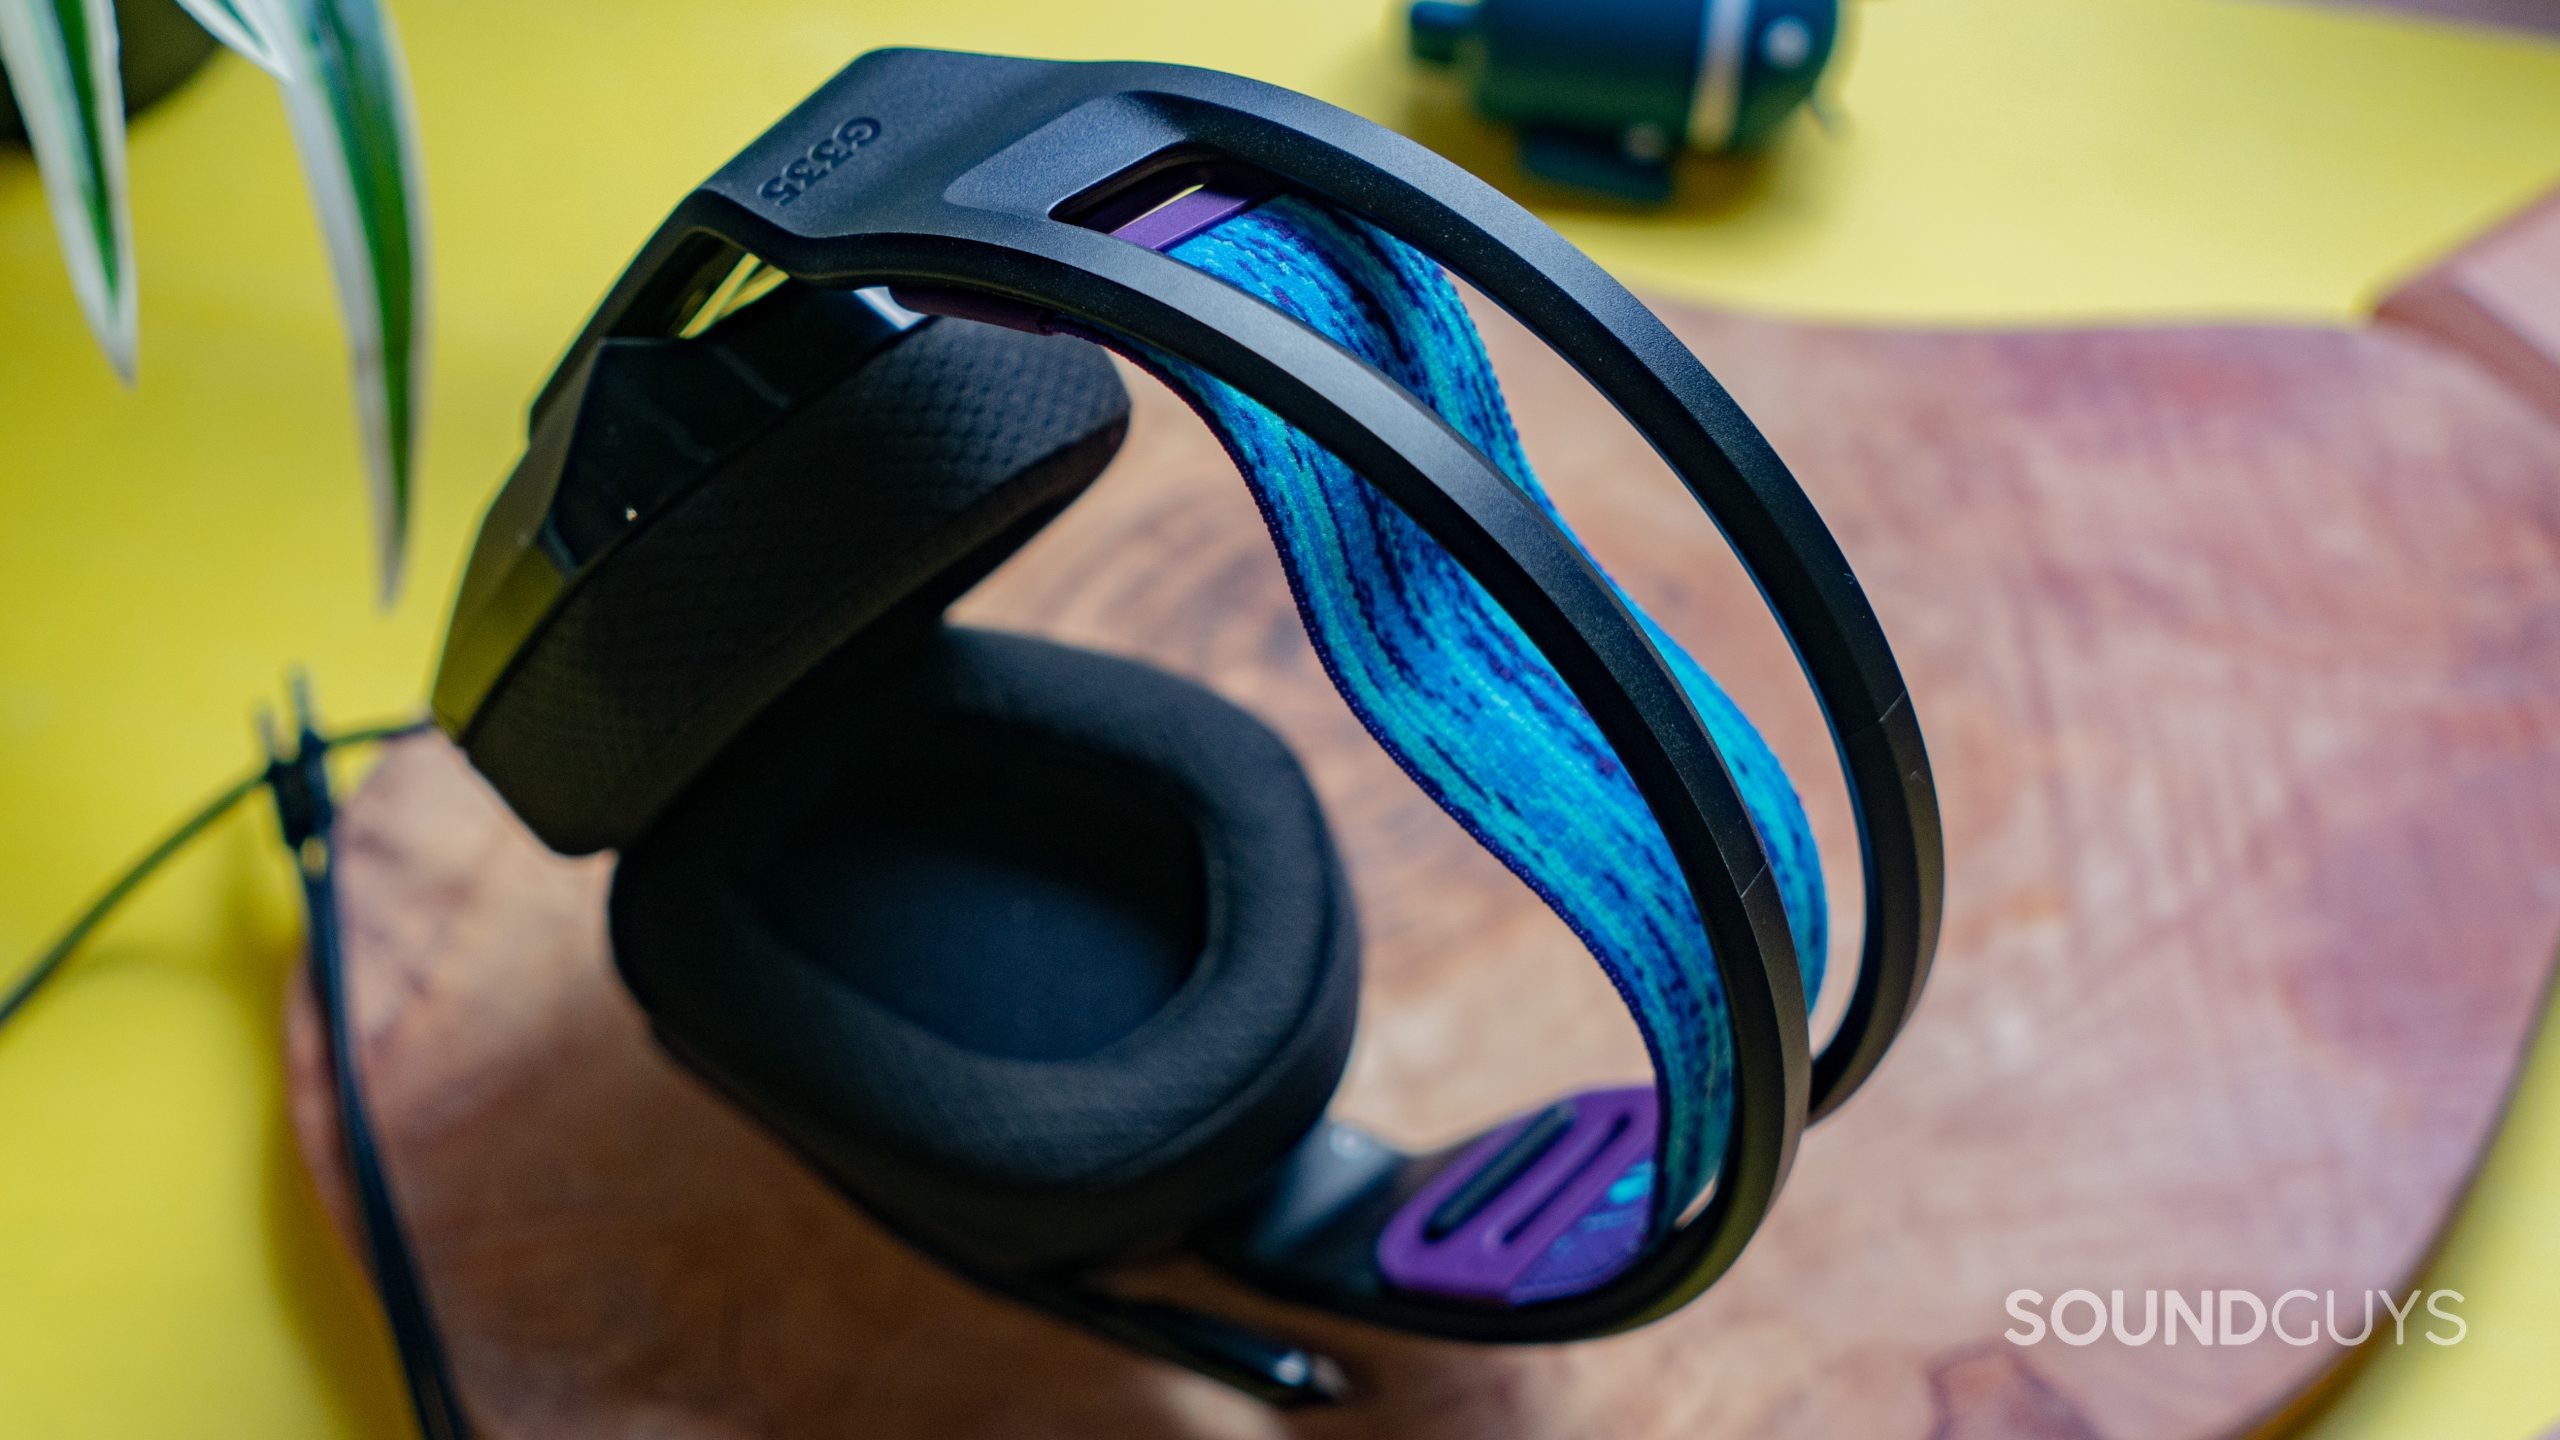 The Logitech G335 blue and purple stretchy headband on top of a wooden table.